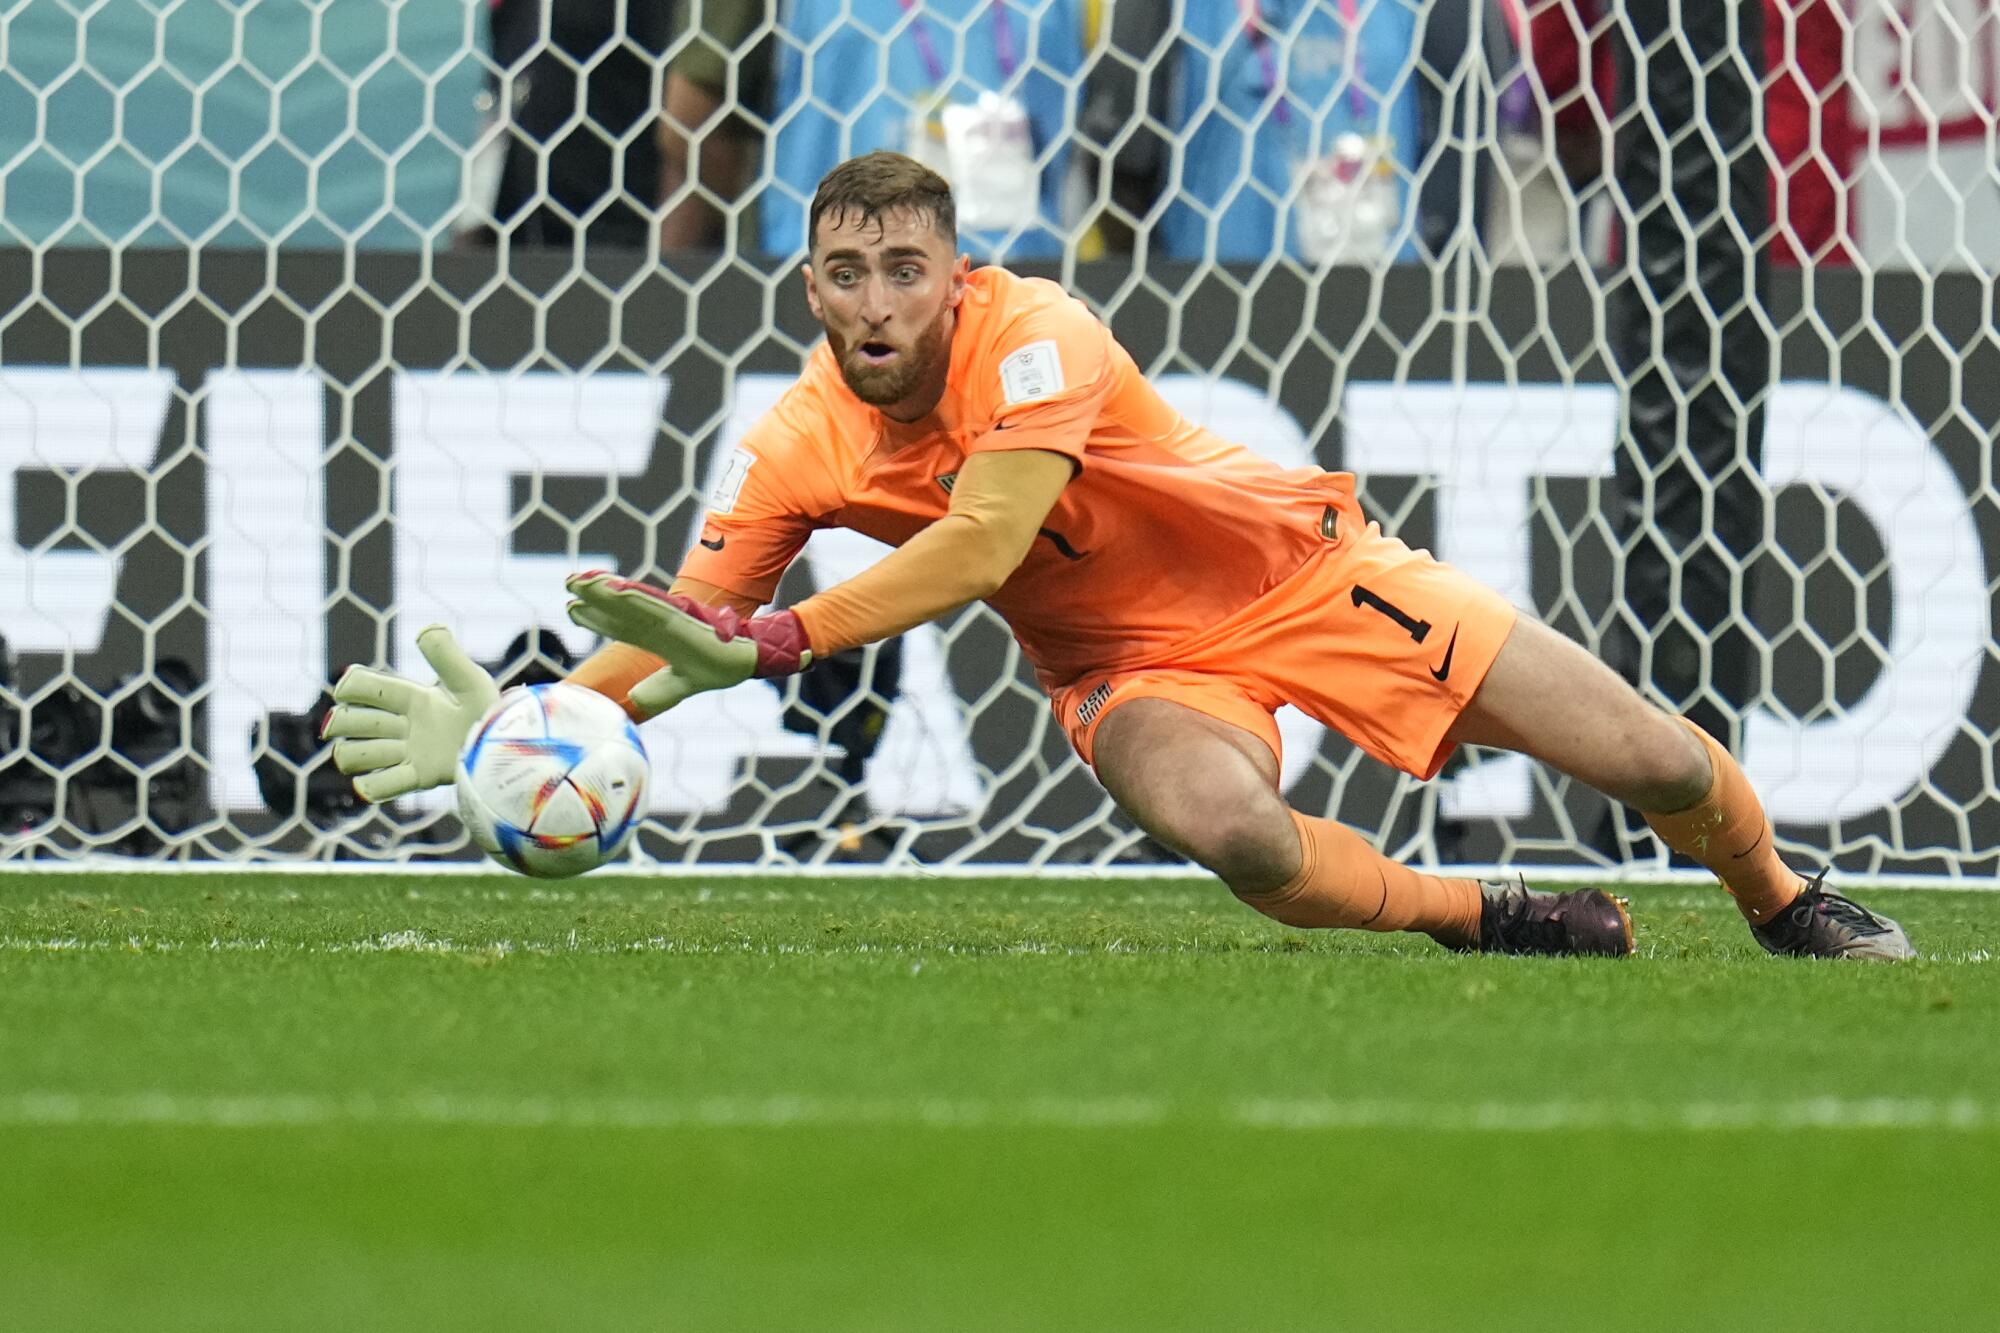 Goalkeeper Matt Turner of the United States makes a save shot by England's Mason Mount.